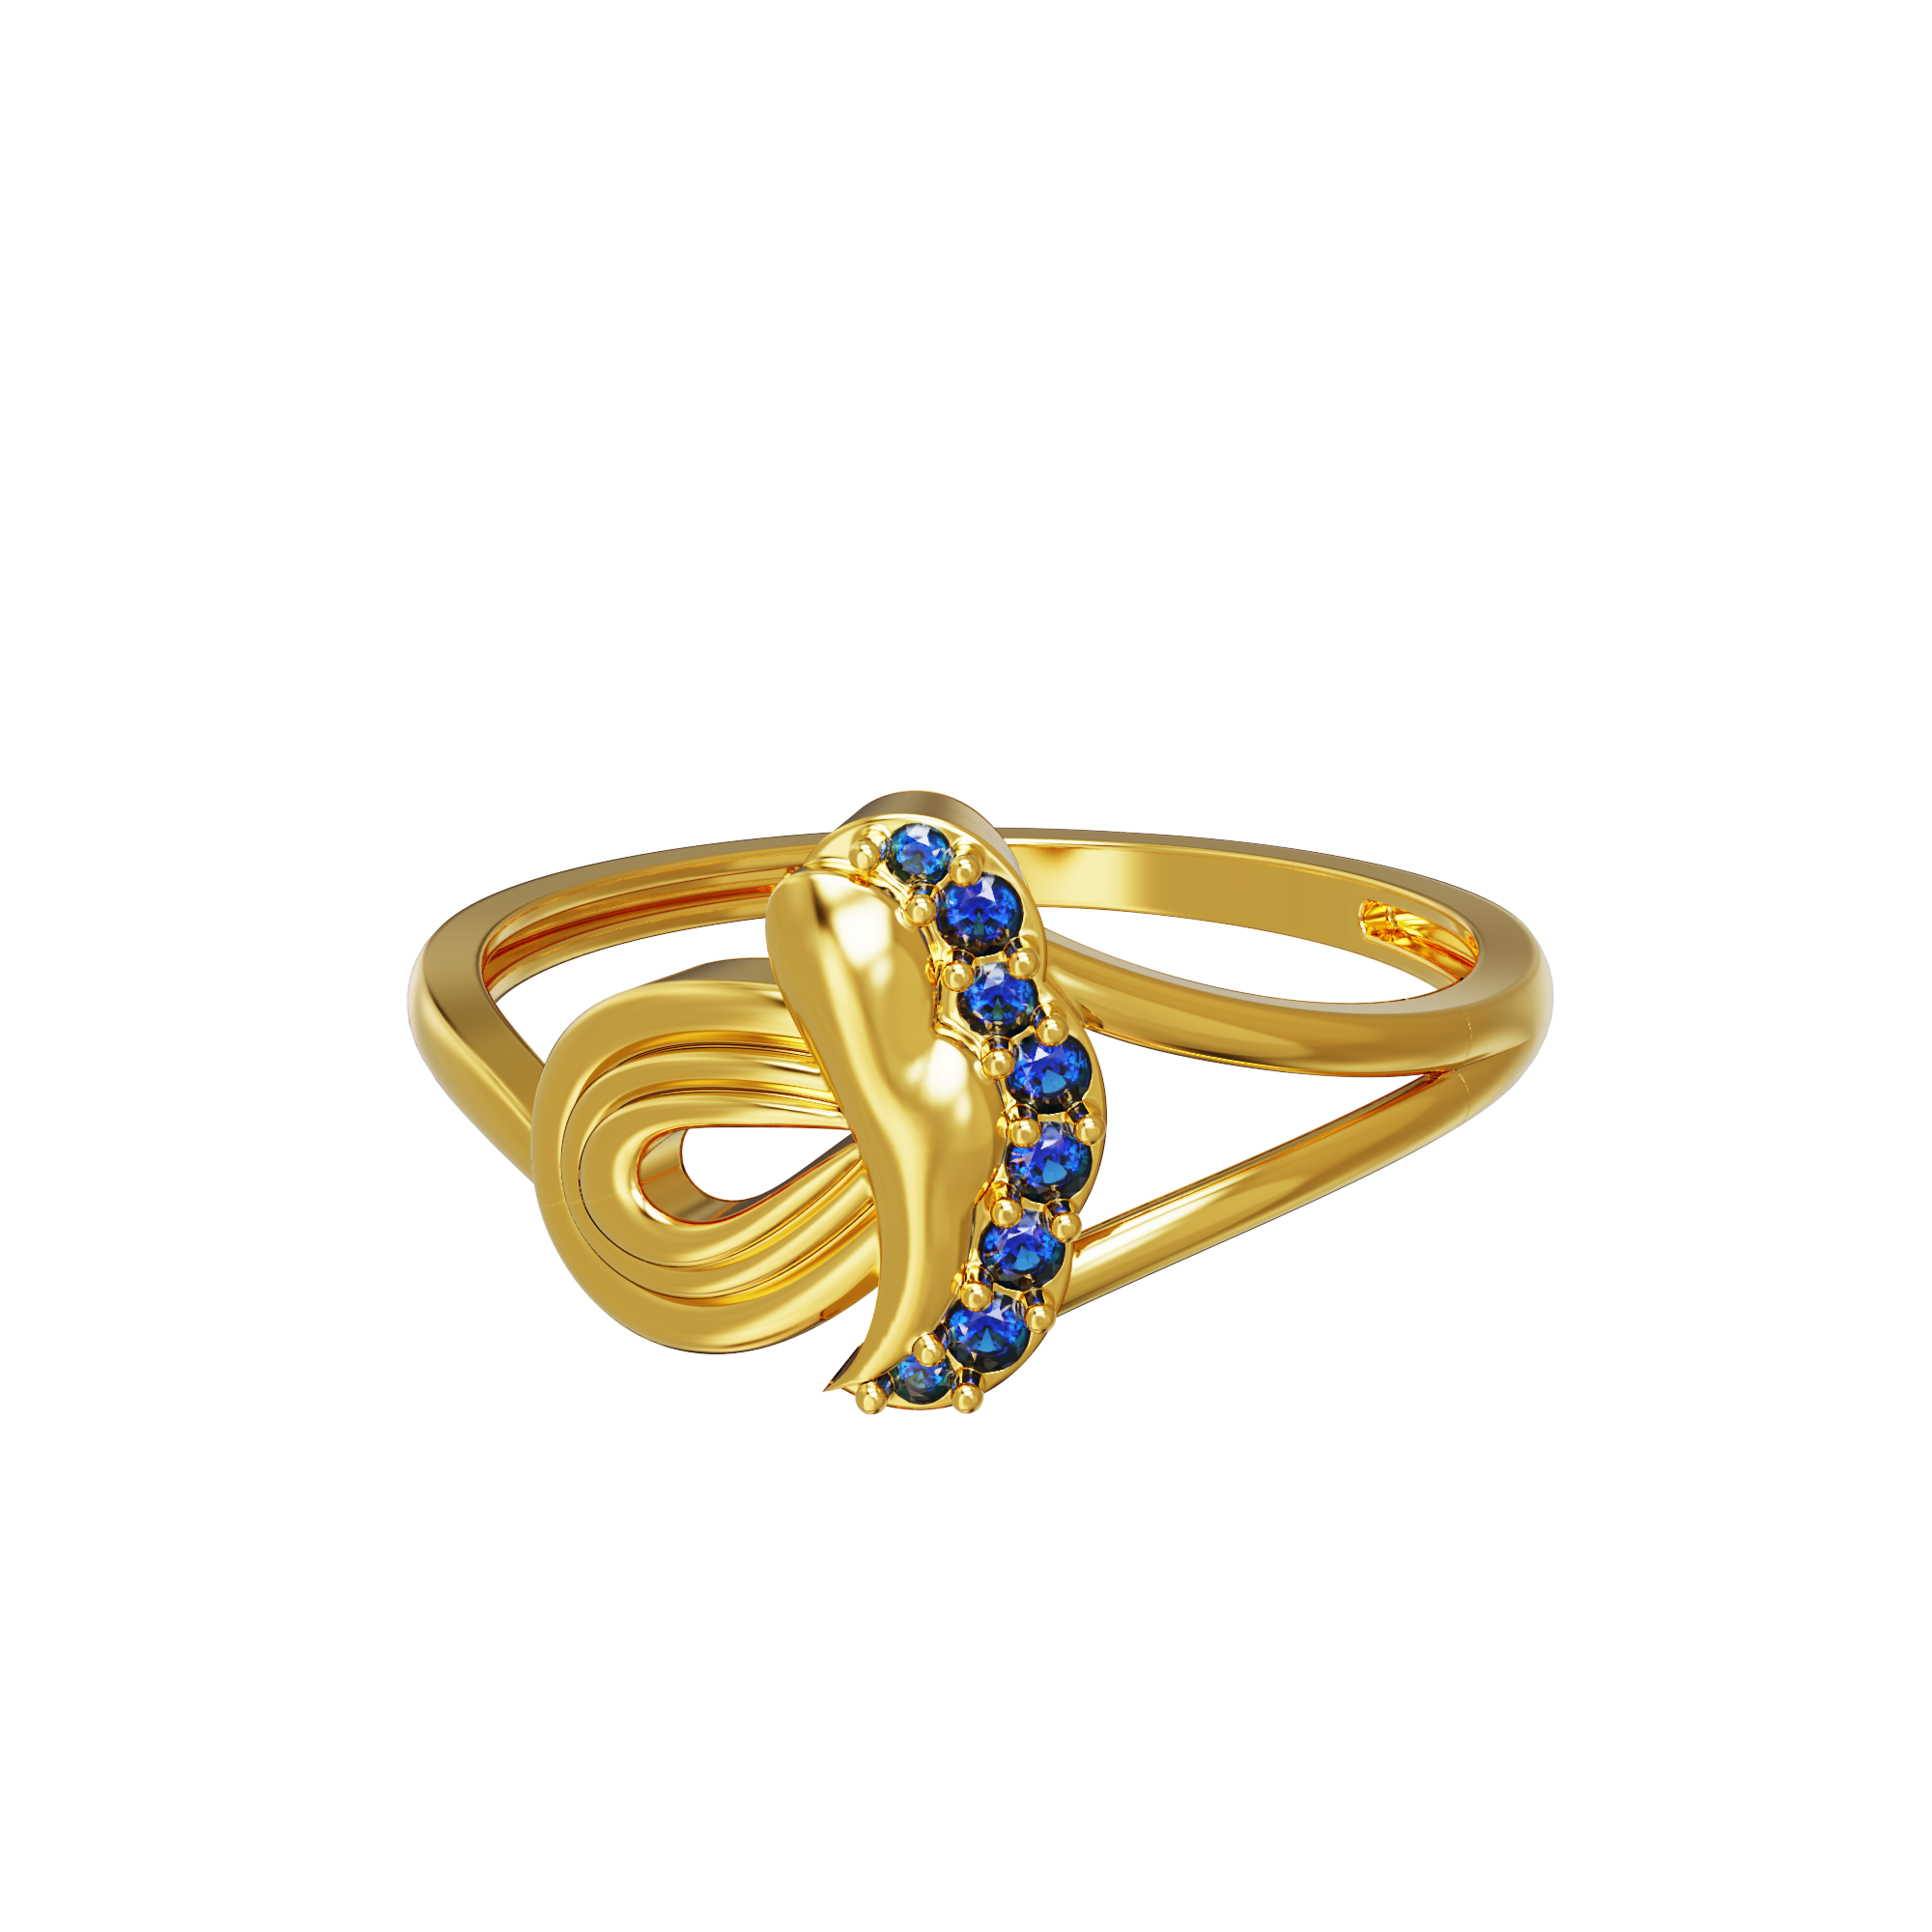 Designer-gold-ring-collections